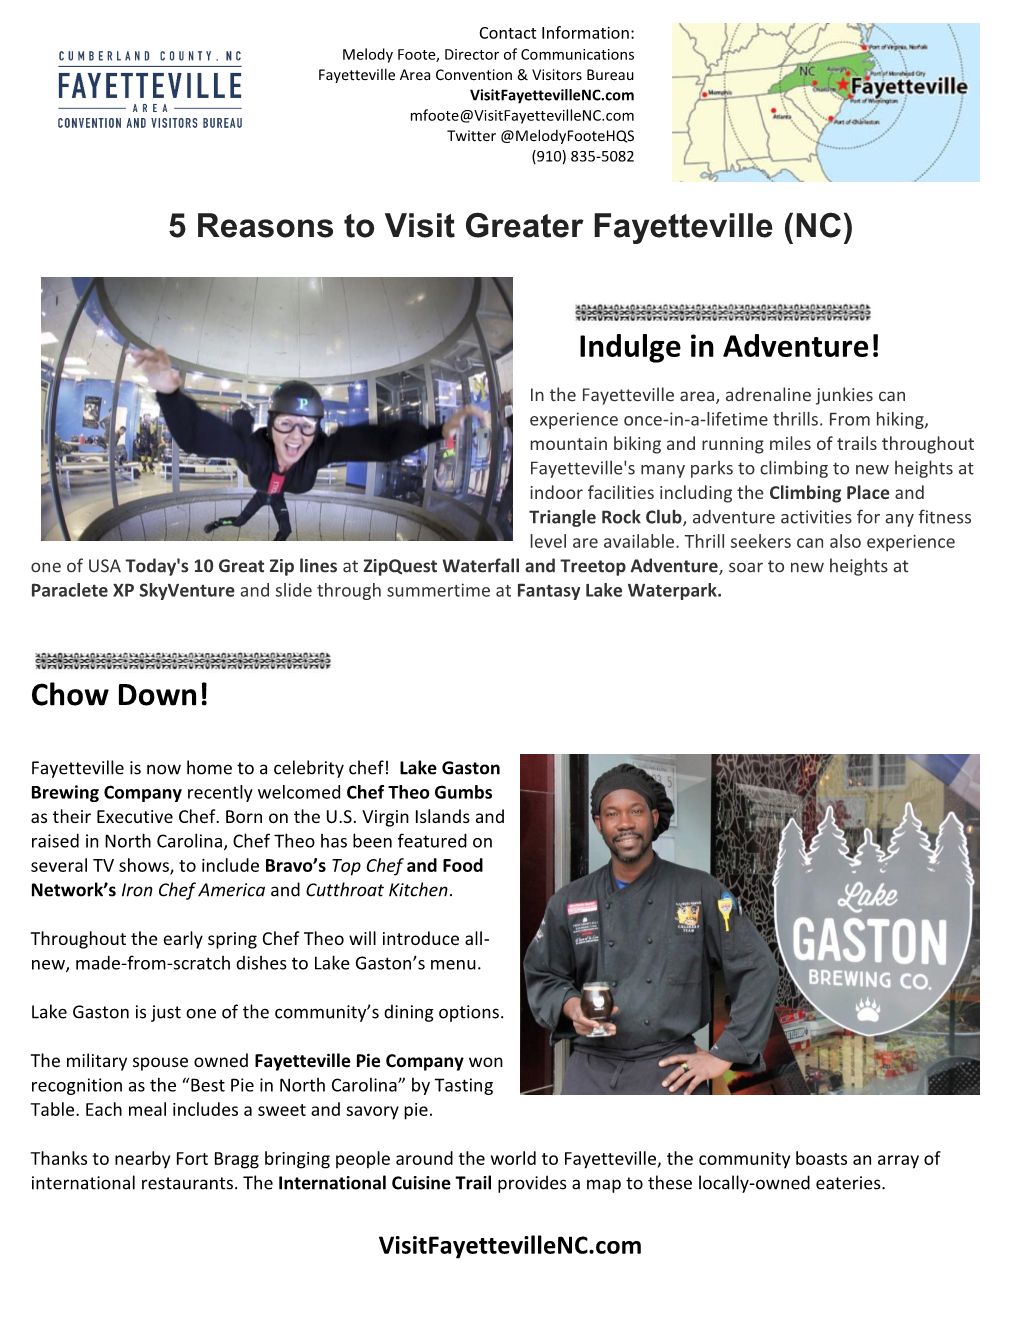 5 Reasons to Visit Greater Fayetteville (NC) Indulge in Adventure! Chow